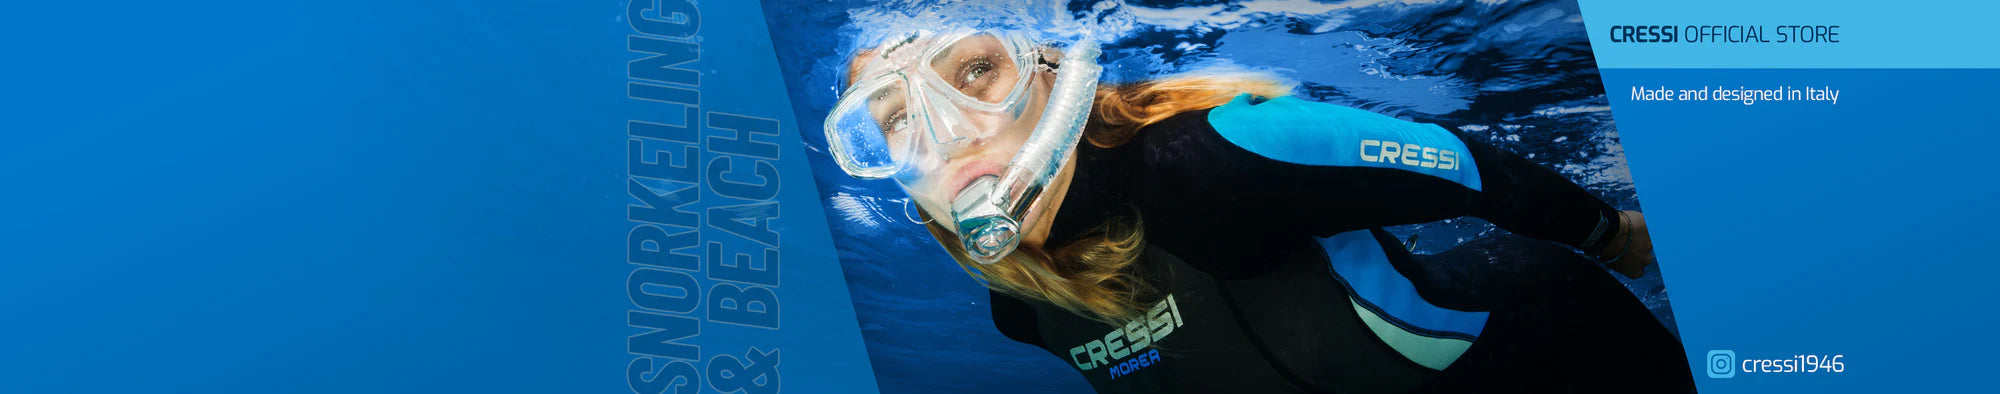 Cressi Diving and Snorkelling Equipment